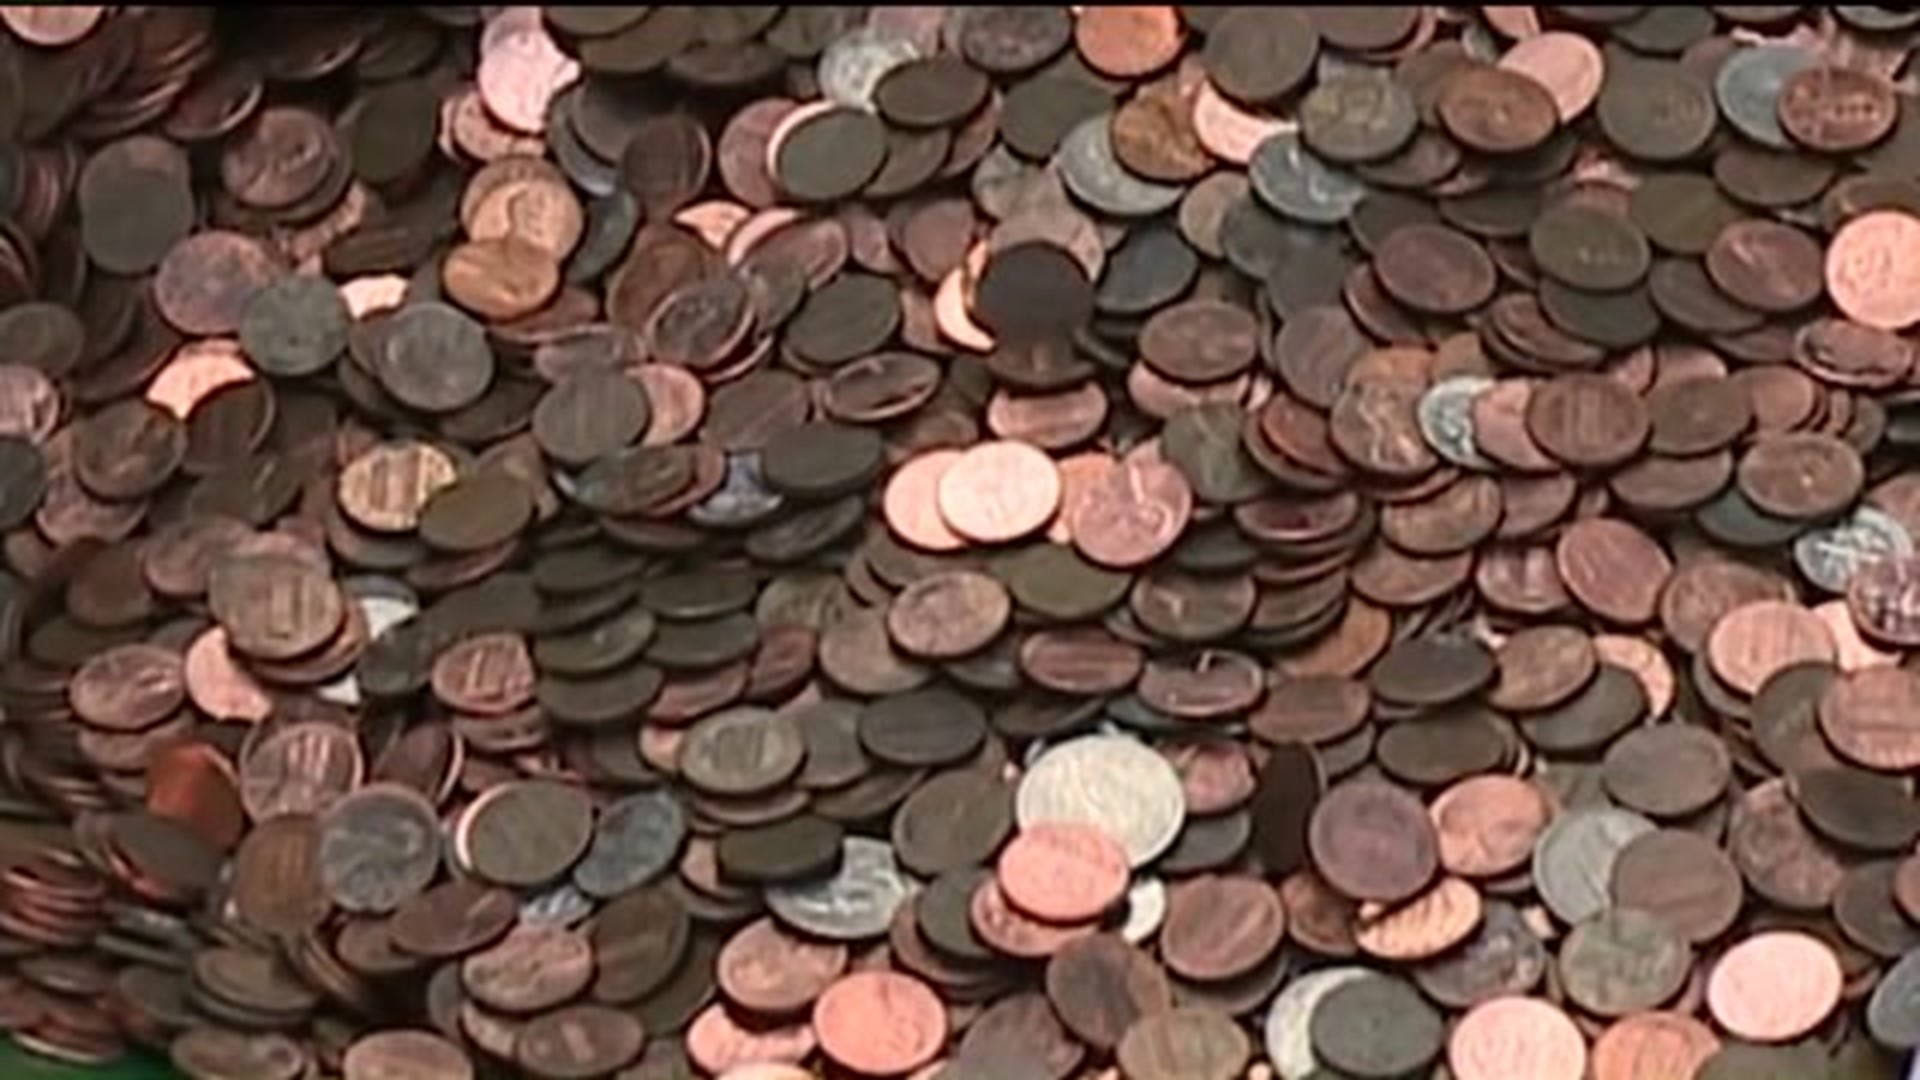 Piling Up Pennies for People in Pottsville